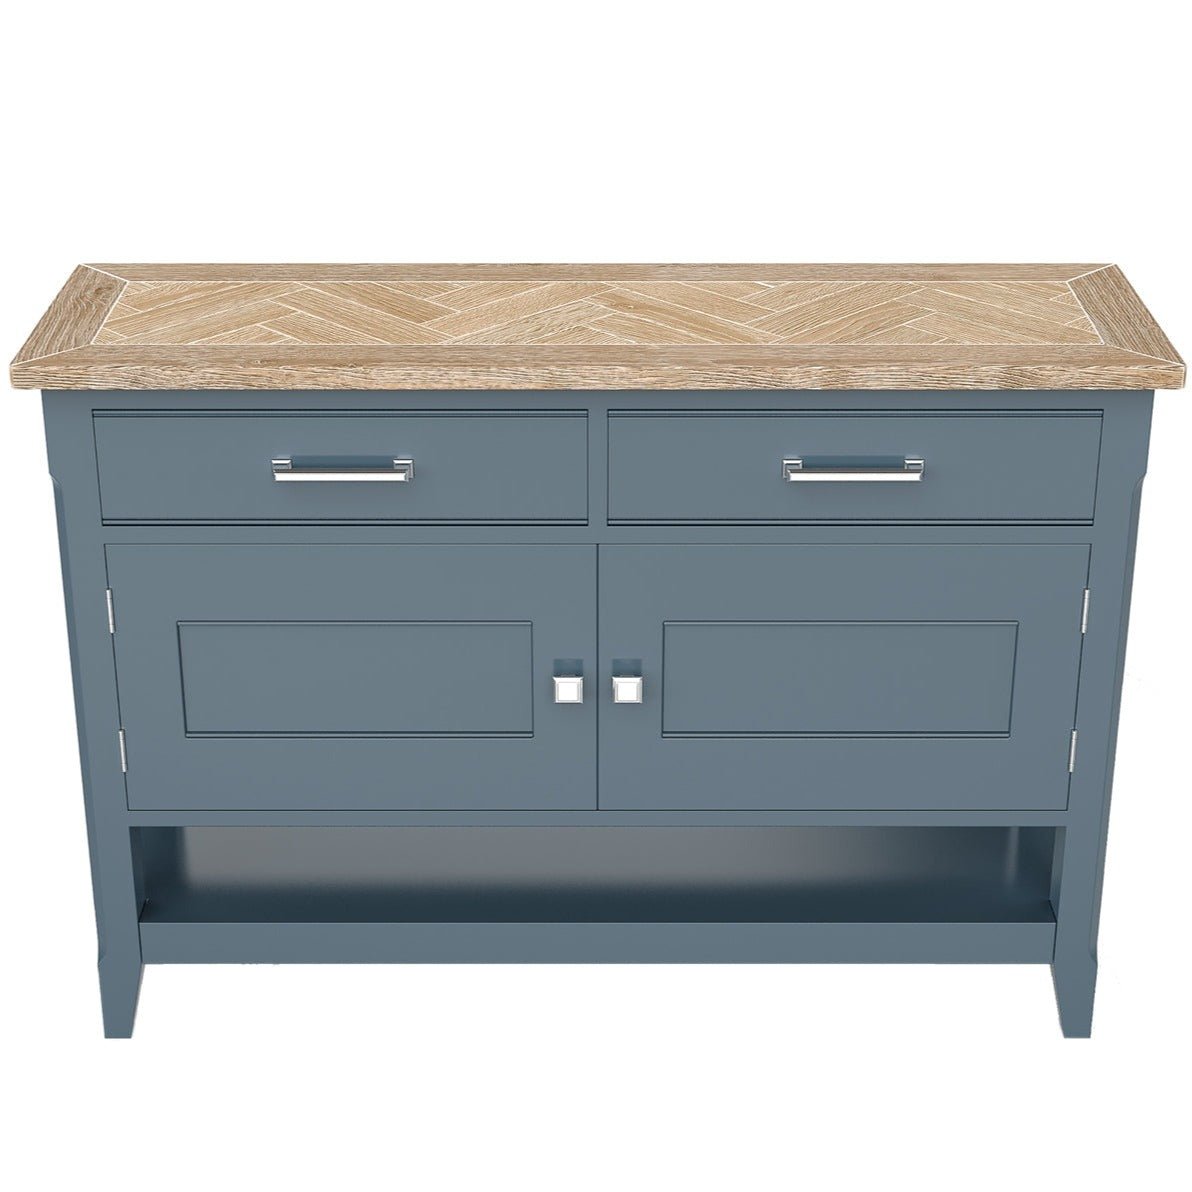 Signature Blue Console Table with Storage - Duck Barn Interiors